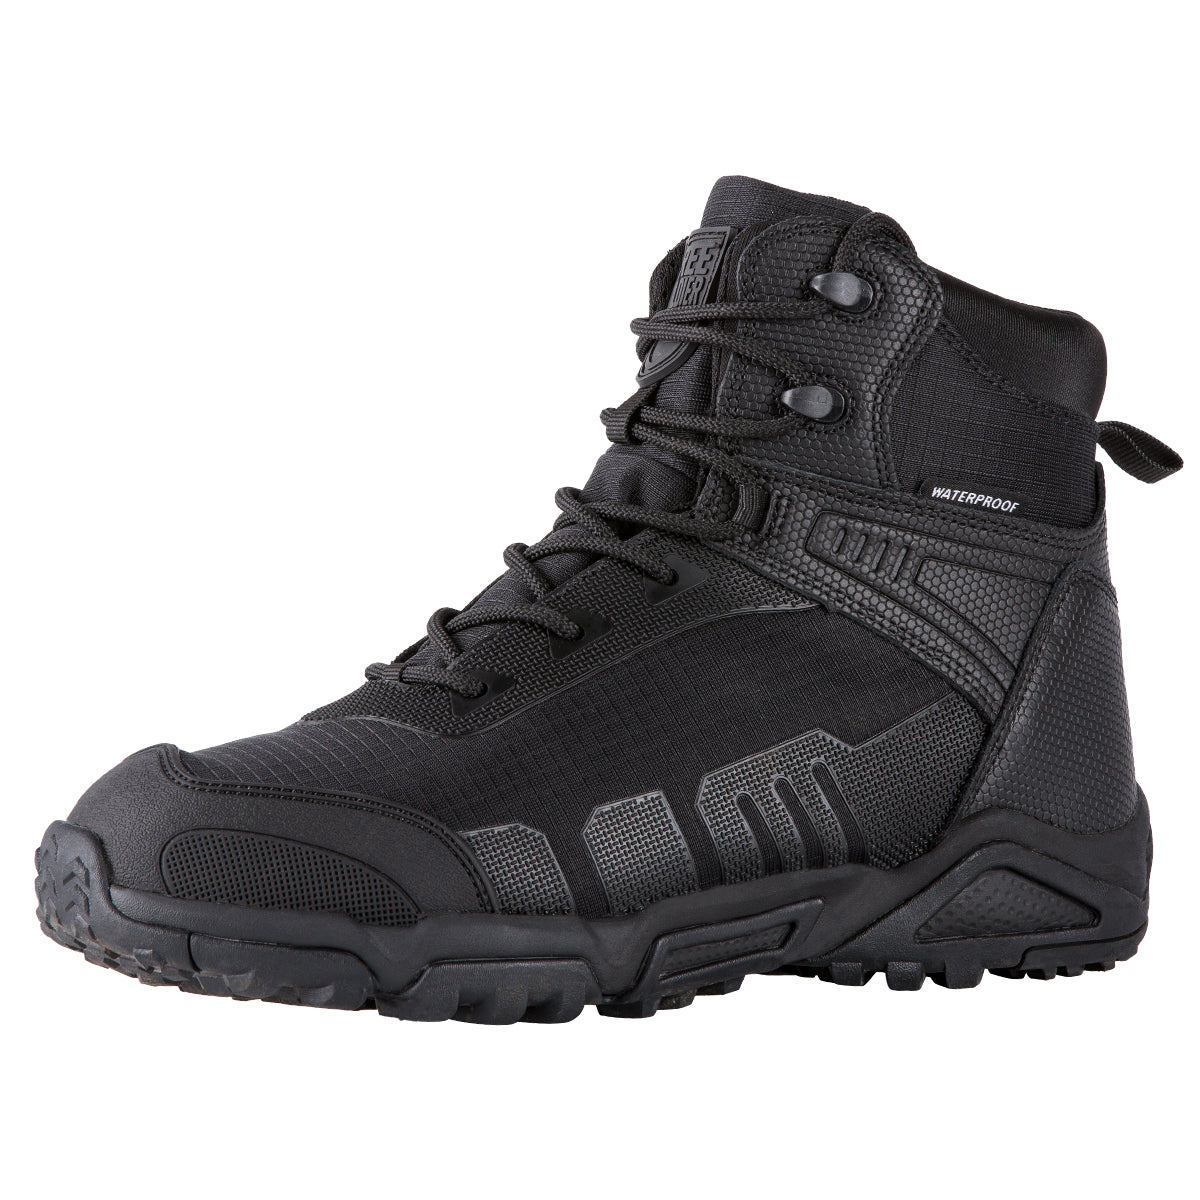 NORTIV 8 Men's Ankle High Waterproof Hiking Boots Kuwait